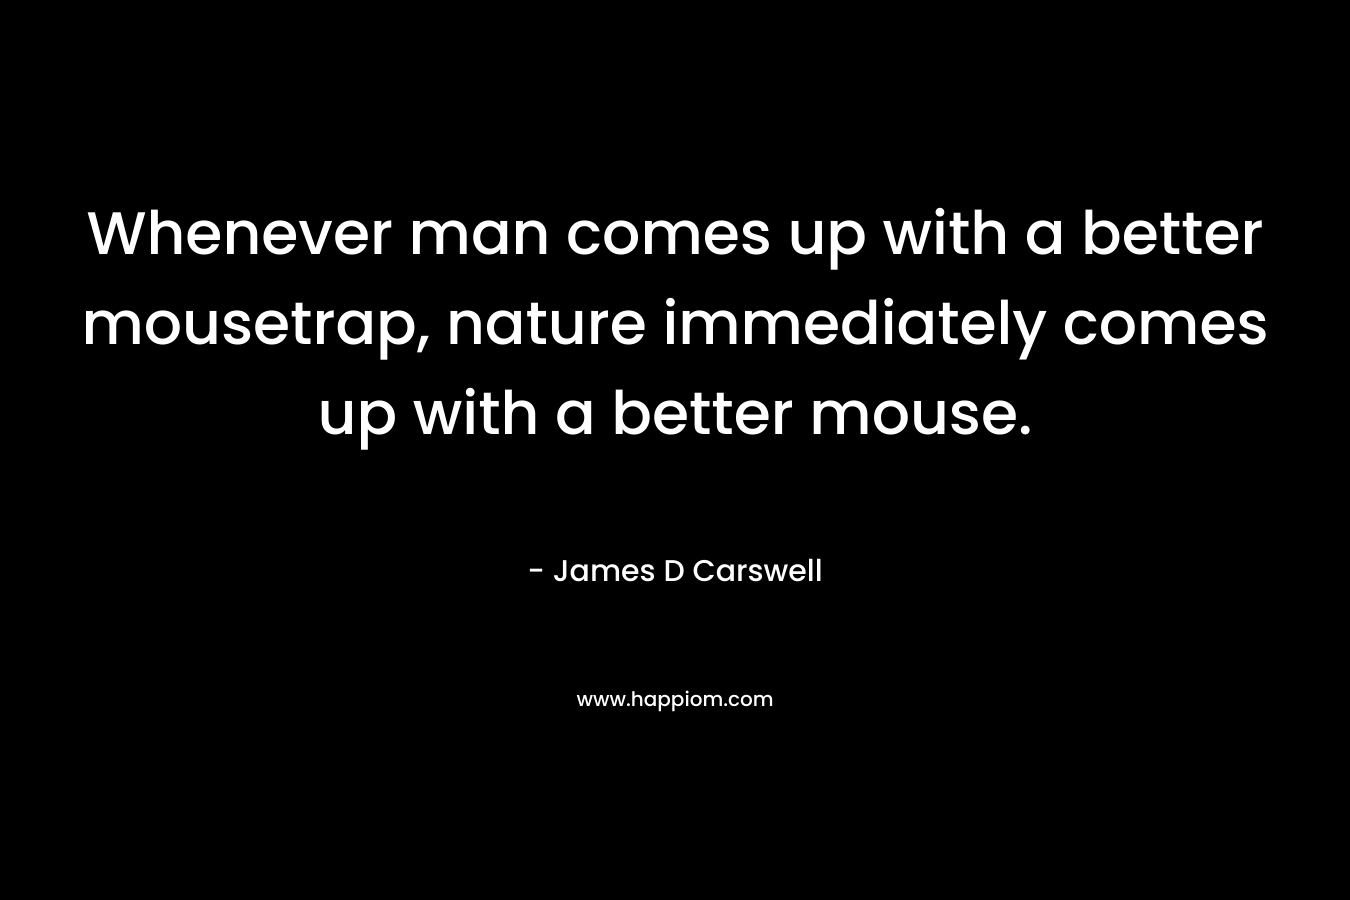 Whenever man comes up with a better mousetrap, nature immediately comes up with a better mouse. – James D Carswell